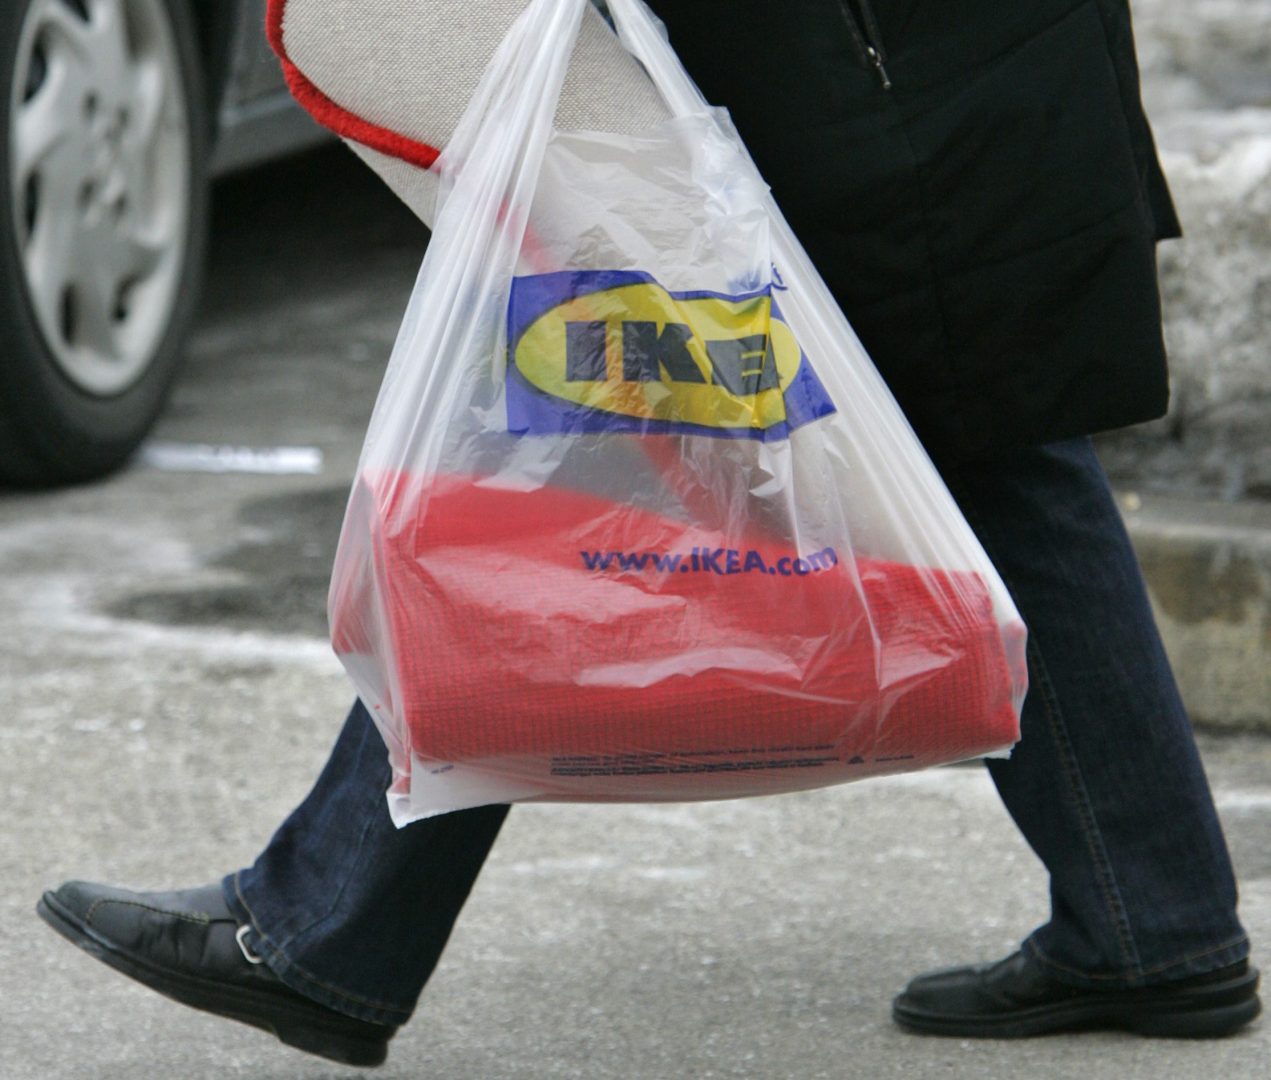 A customer totes a shopping bag outside an Ikea store in Conshohocken, Pa., on Tuesday, Feb. 20, 2007. The Swedish retailer, which has its U.S. headquarters in suburban Conshohocken, announced Tuesday that it will start charging customers a nickel for 